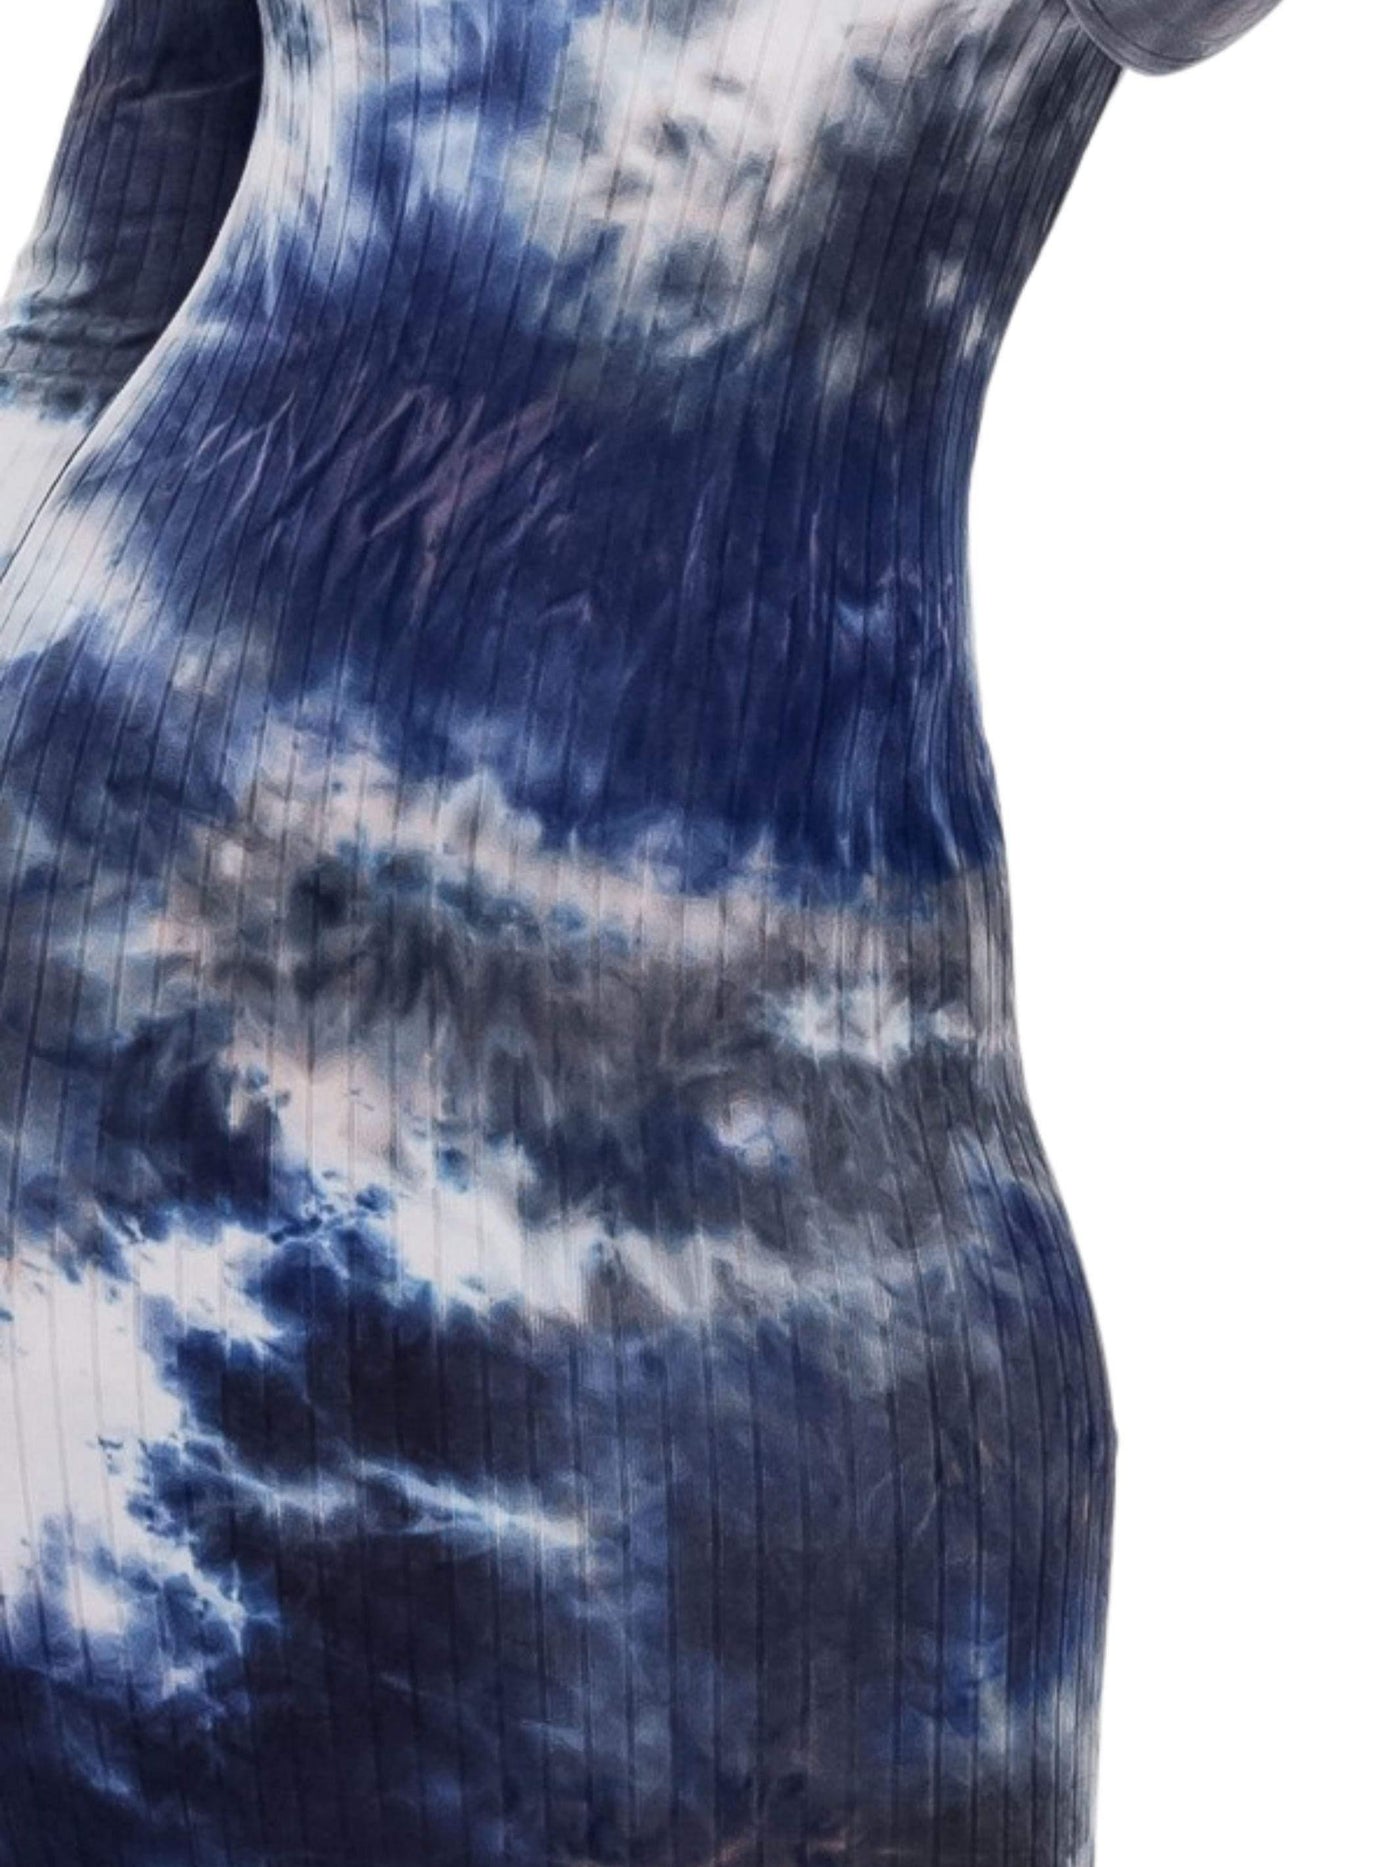 Tie Dye & Demand | Bodycon Midi Dress - Statement Piece NY _tab_size-chart, Blue, Brooklyn Boutique, chic, cute dress, cute dresses for women, dress, Dresses, dresses & jumpsuits, Dresses & Skirts, Fall, Fall Fashion, final sale, Long Sleeve, Midi Dress, Misses, not clearance, Ships from USA, SPNY Exclusive, Standard Fall, statement, Statement Clothing, statement piece, Statement Piece Boutique, statement piece ny, Statement Pieces, Statement Pieces Boutique, Women's Boutique Statement Dresses